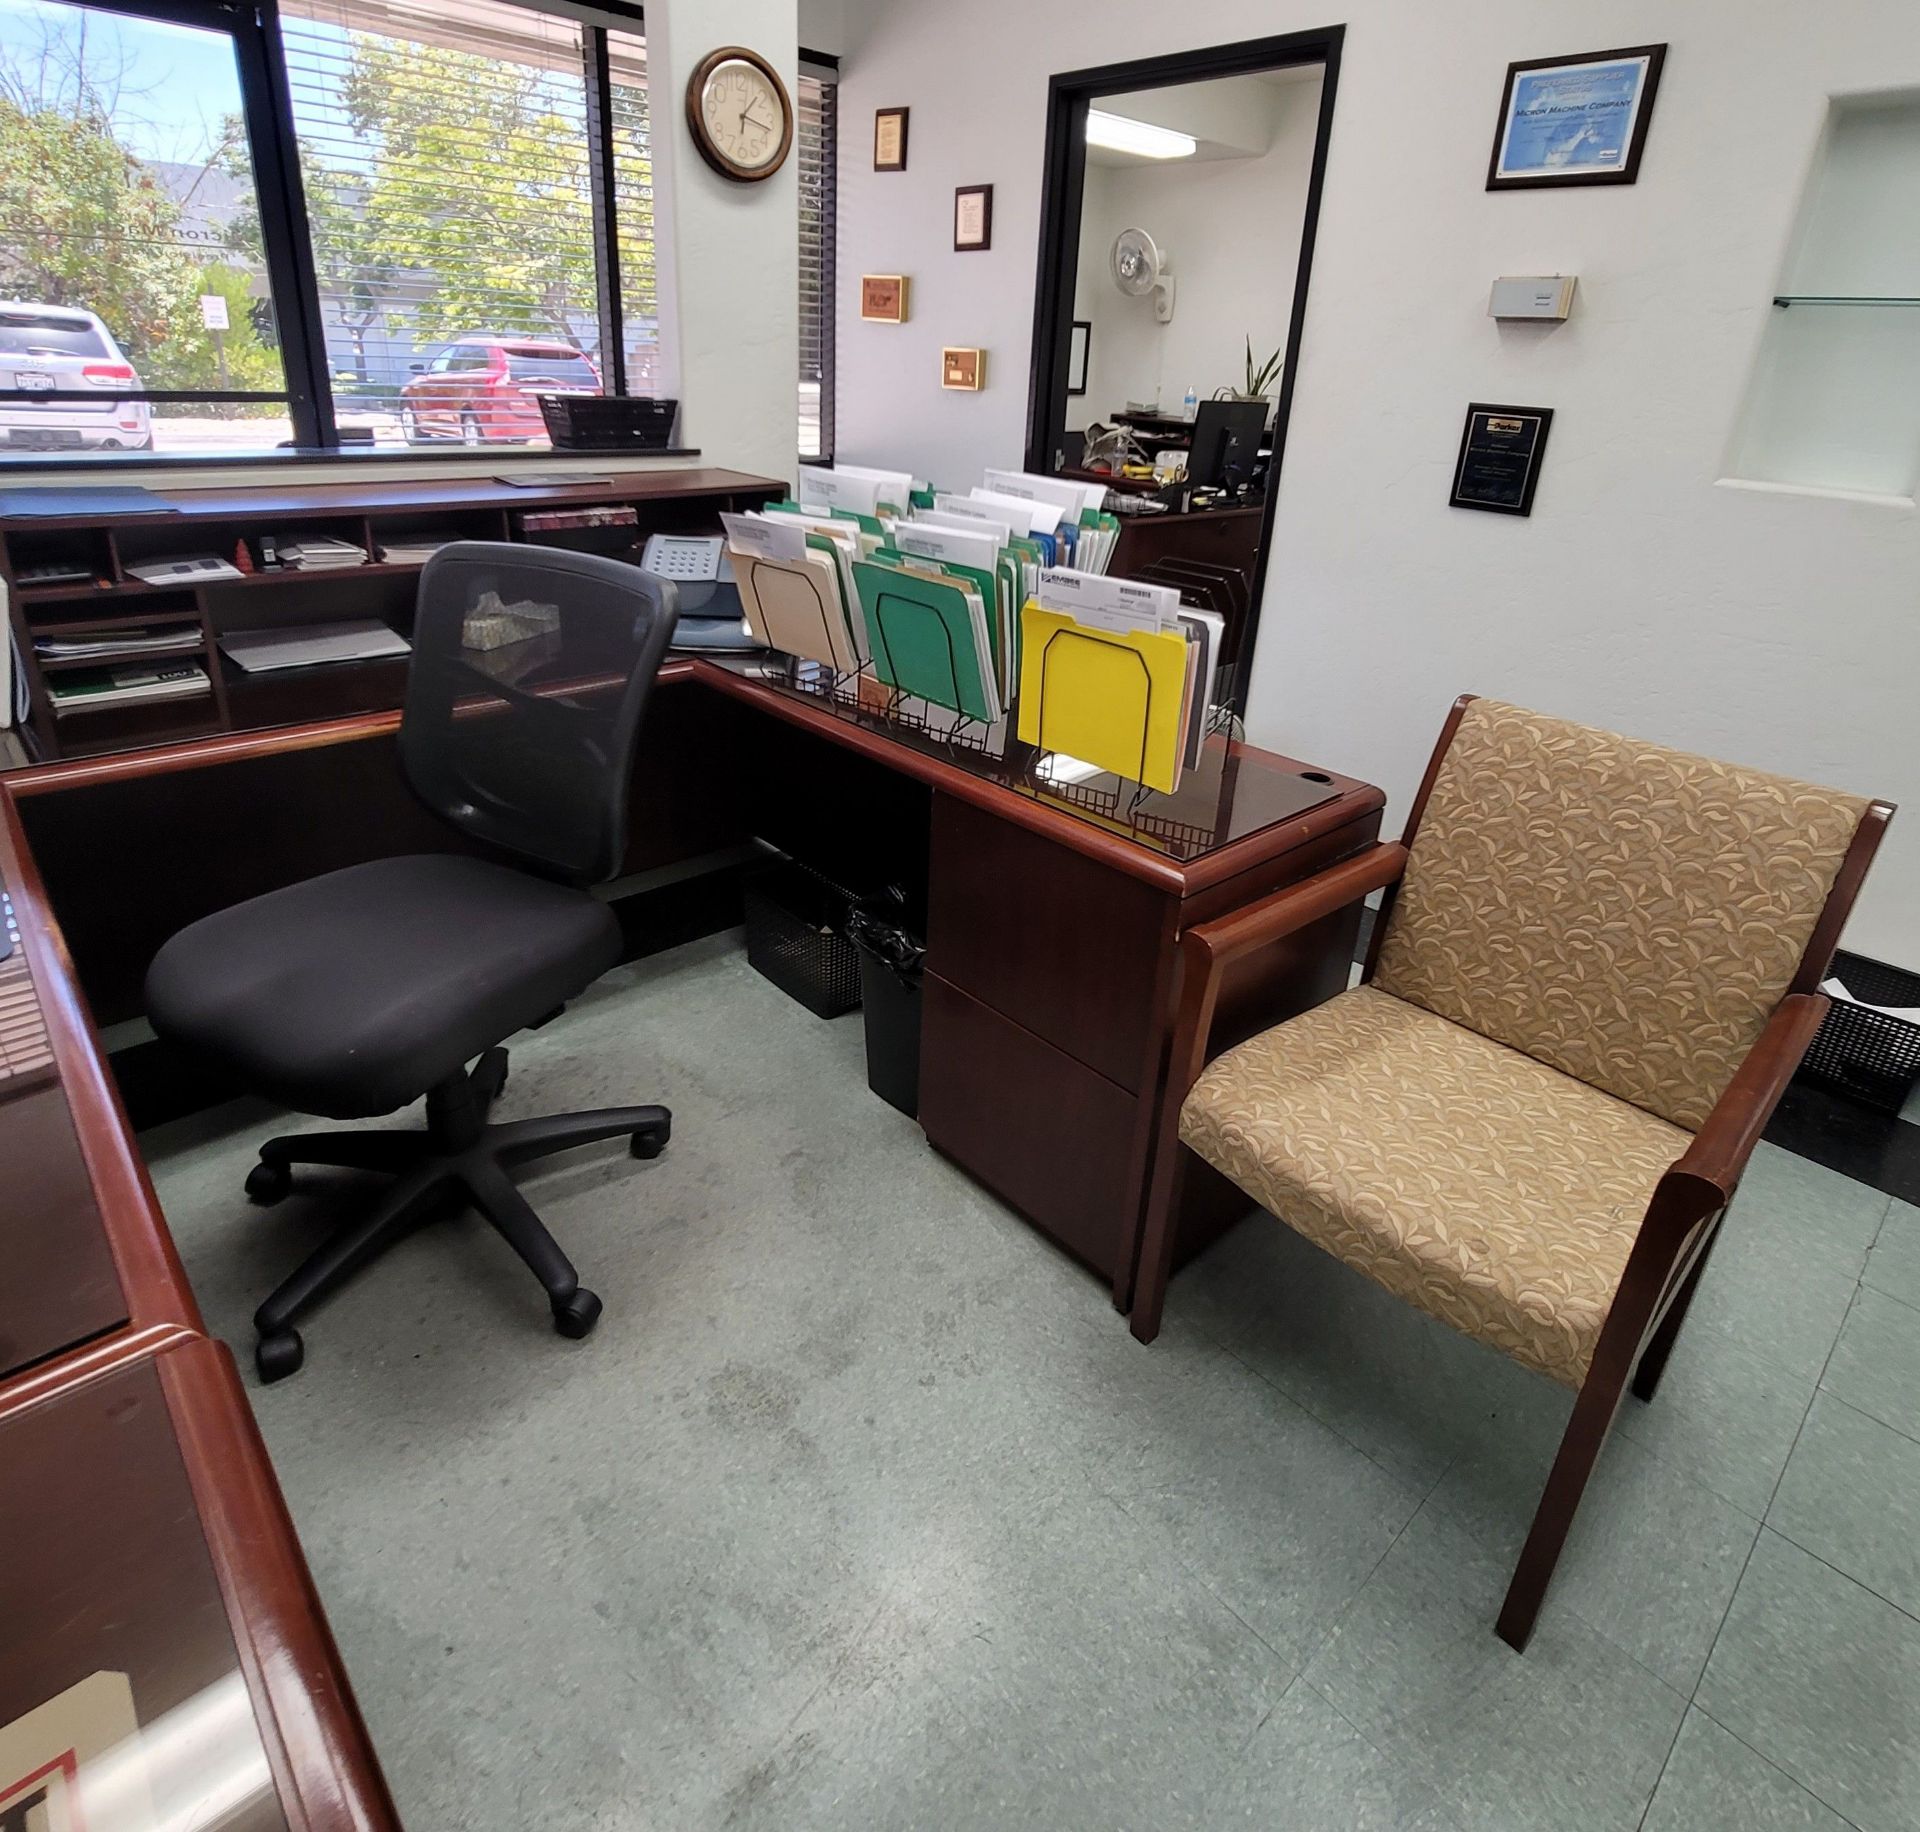 LOT - 6' X 8' U-SHAPED DESK, 2-DRAWER MATCHING LATERAL FILE CABINET, OFFICE CHAIR, CLIENT CHAIR, - Image 3 of 4